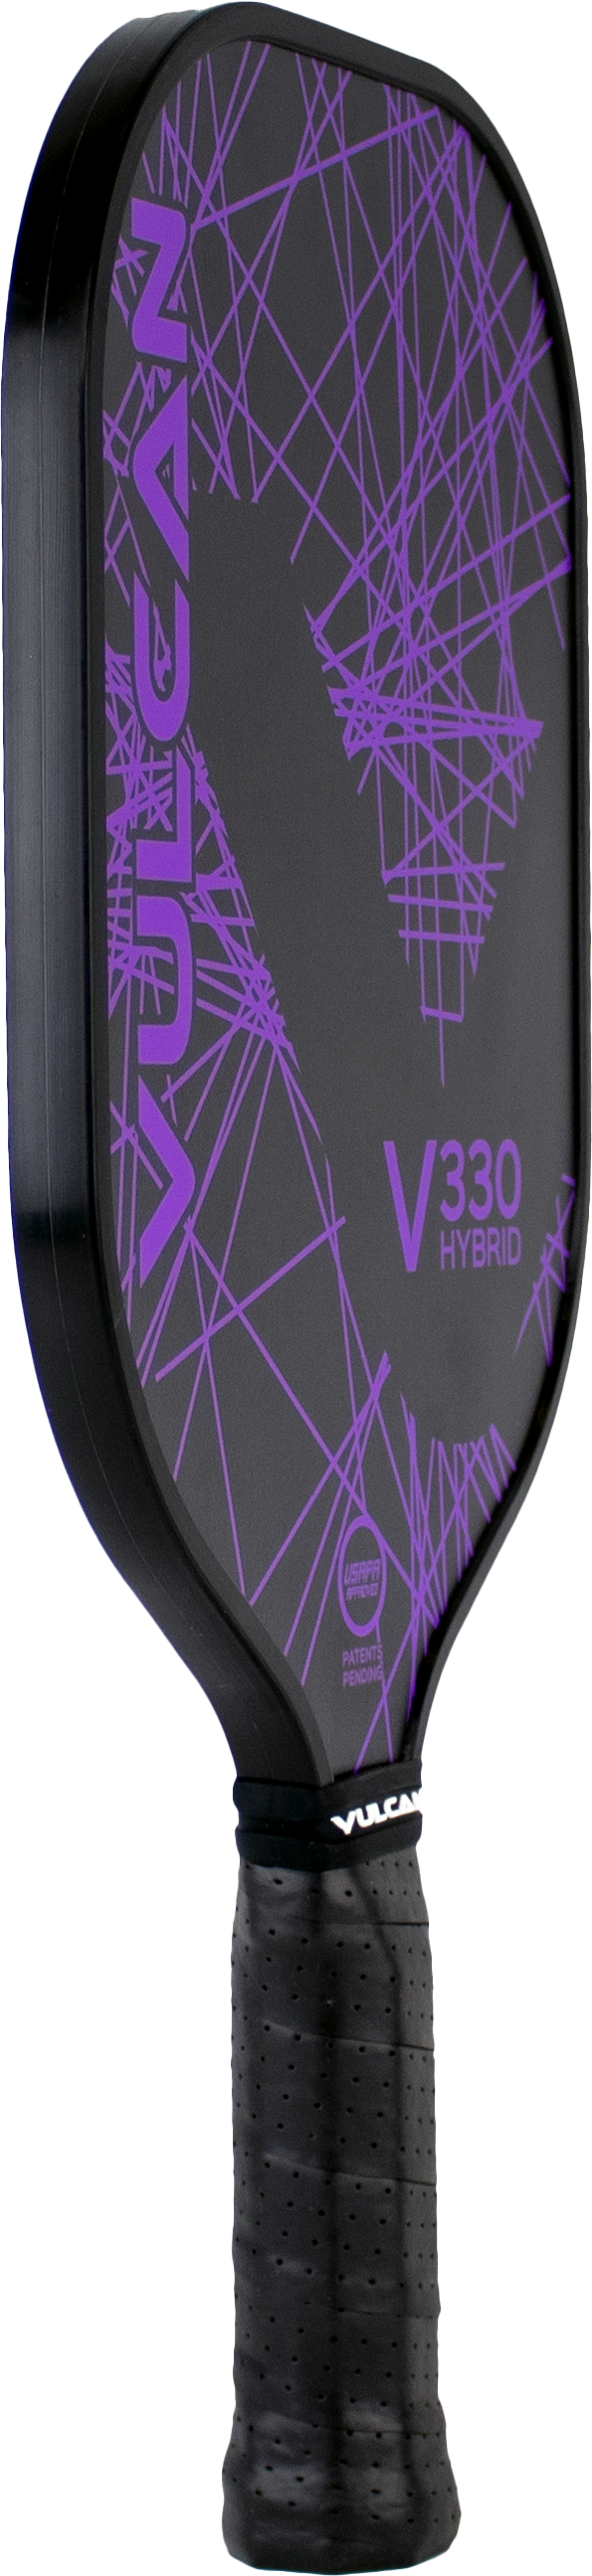 A purple and black disc with the word Vulcan V330 Pickleball Paddle on it.